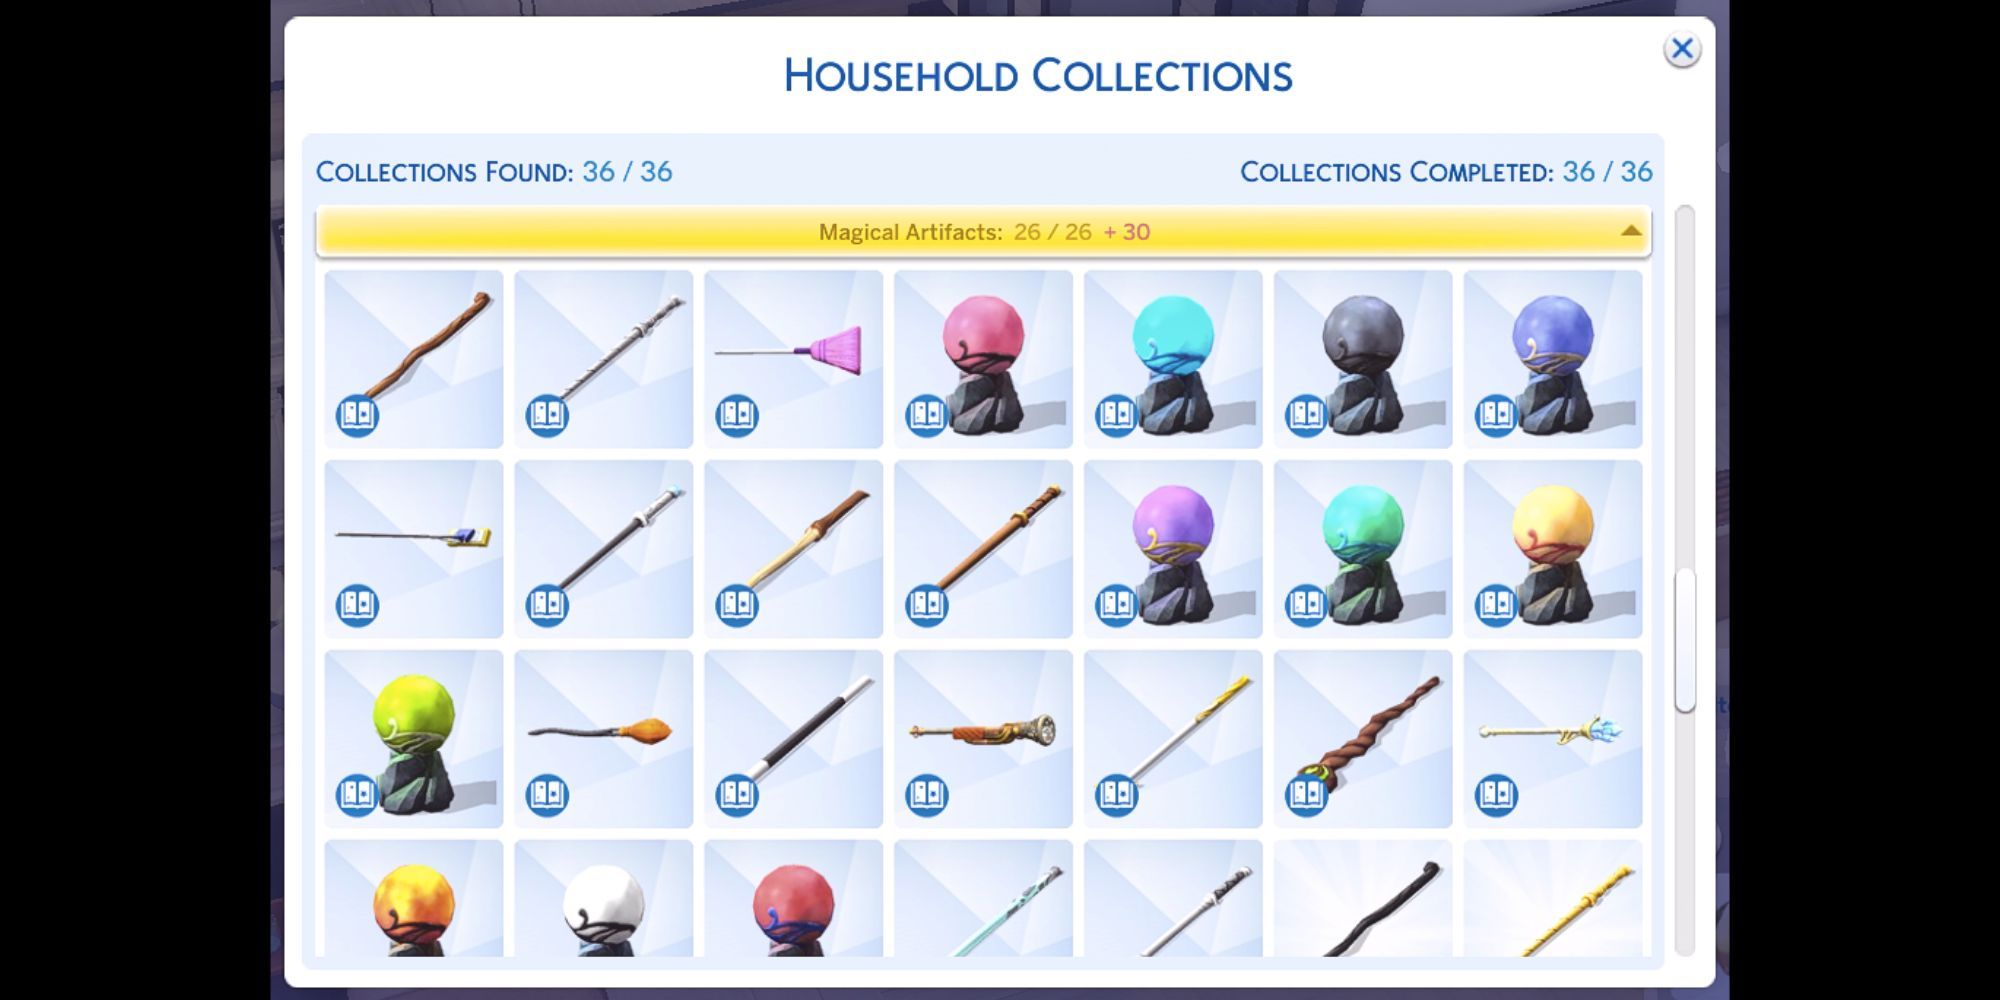 The Sims 4 Magical Artifacts Collection